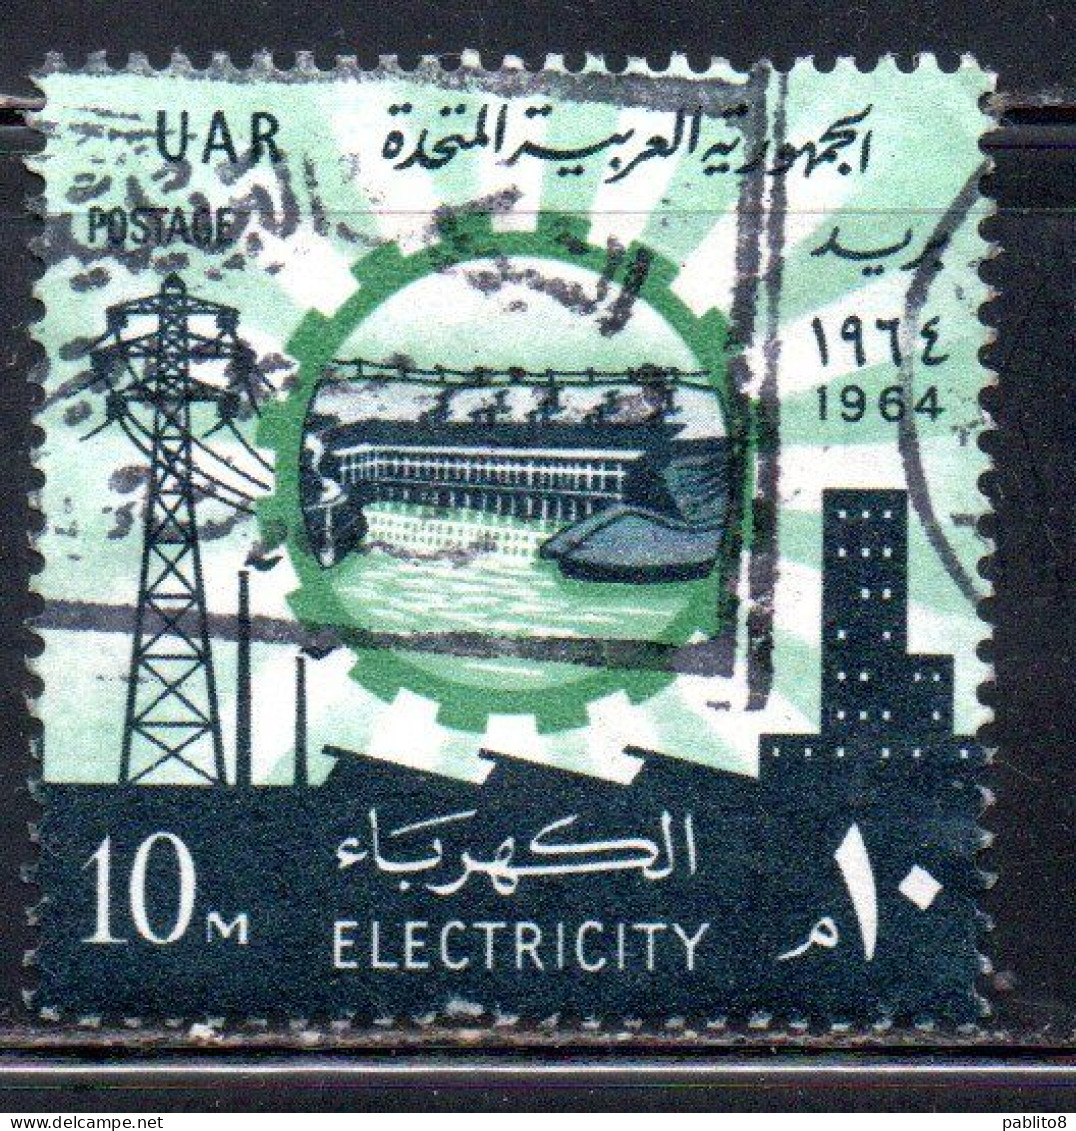 UAR EGYPT EGITTO 1964 ELECTRICITY ASWAN HIGH DAM HYDROELICTRIC POWER STATION LAND RECLAMATION 10m USED USATO - Used Stamps